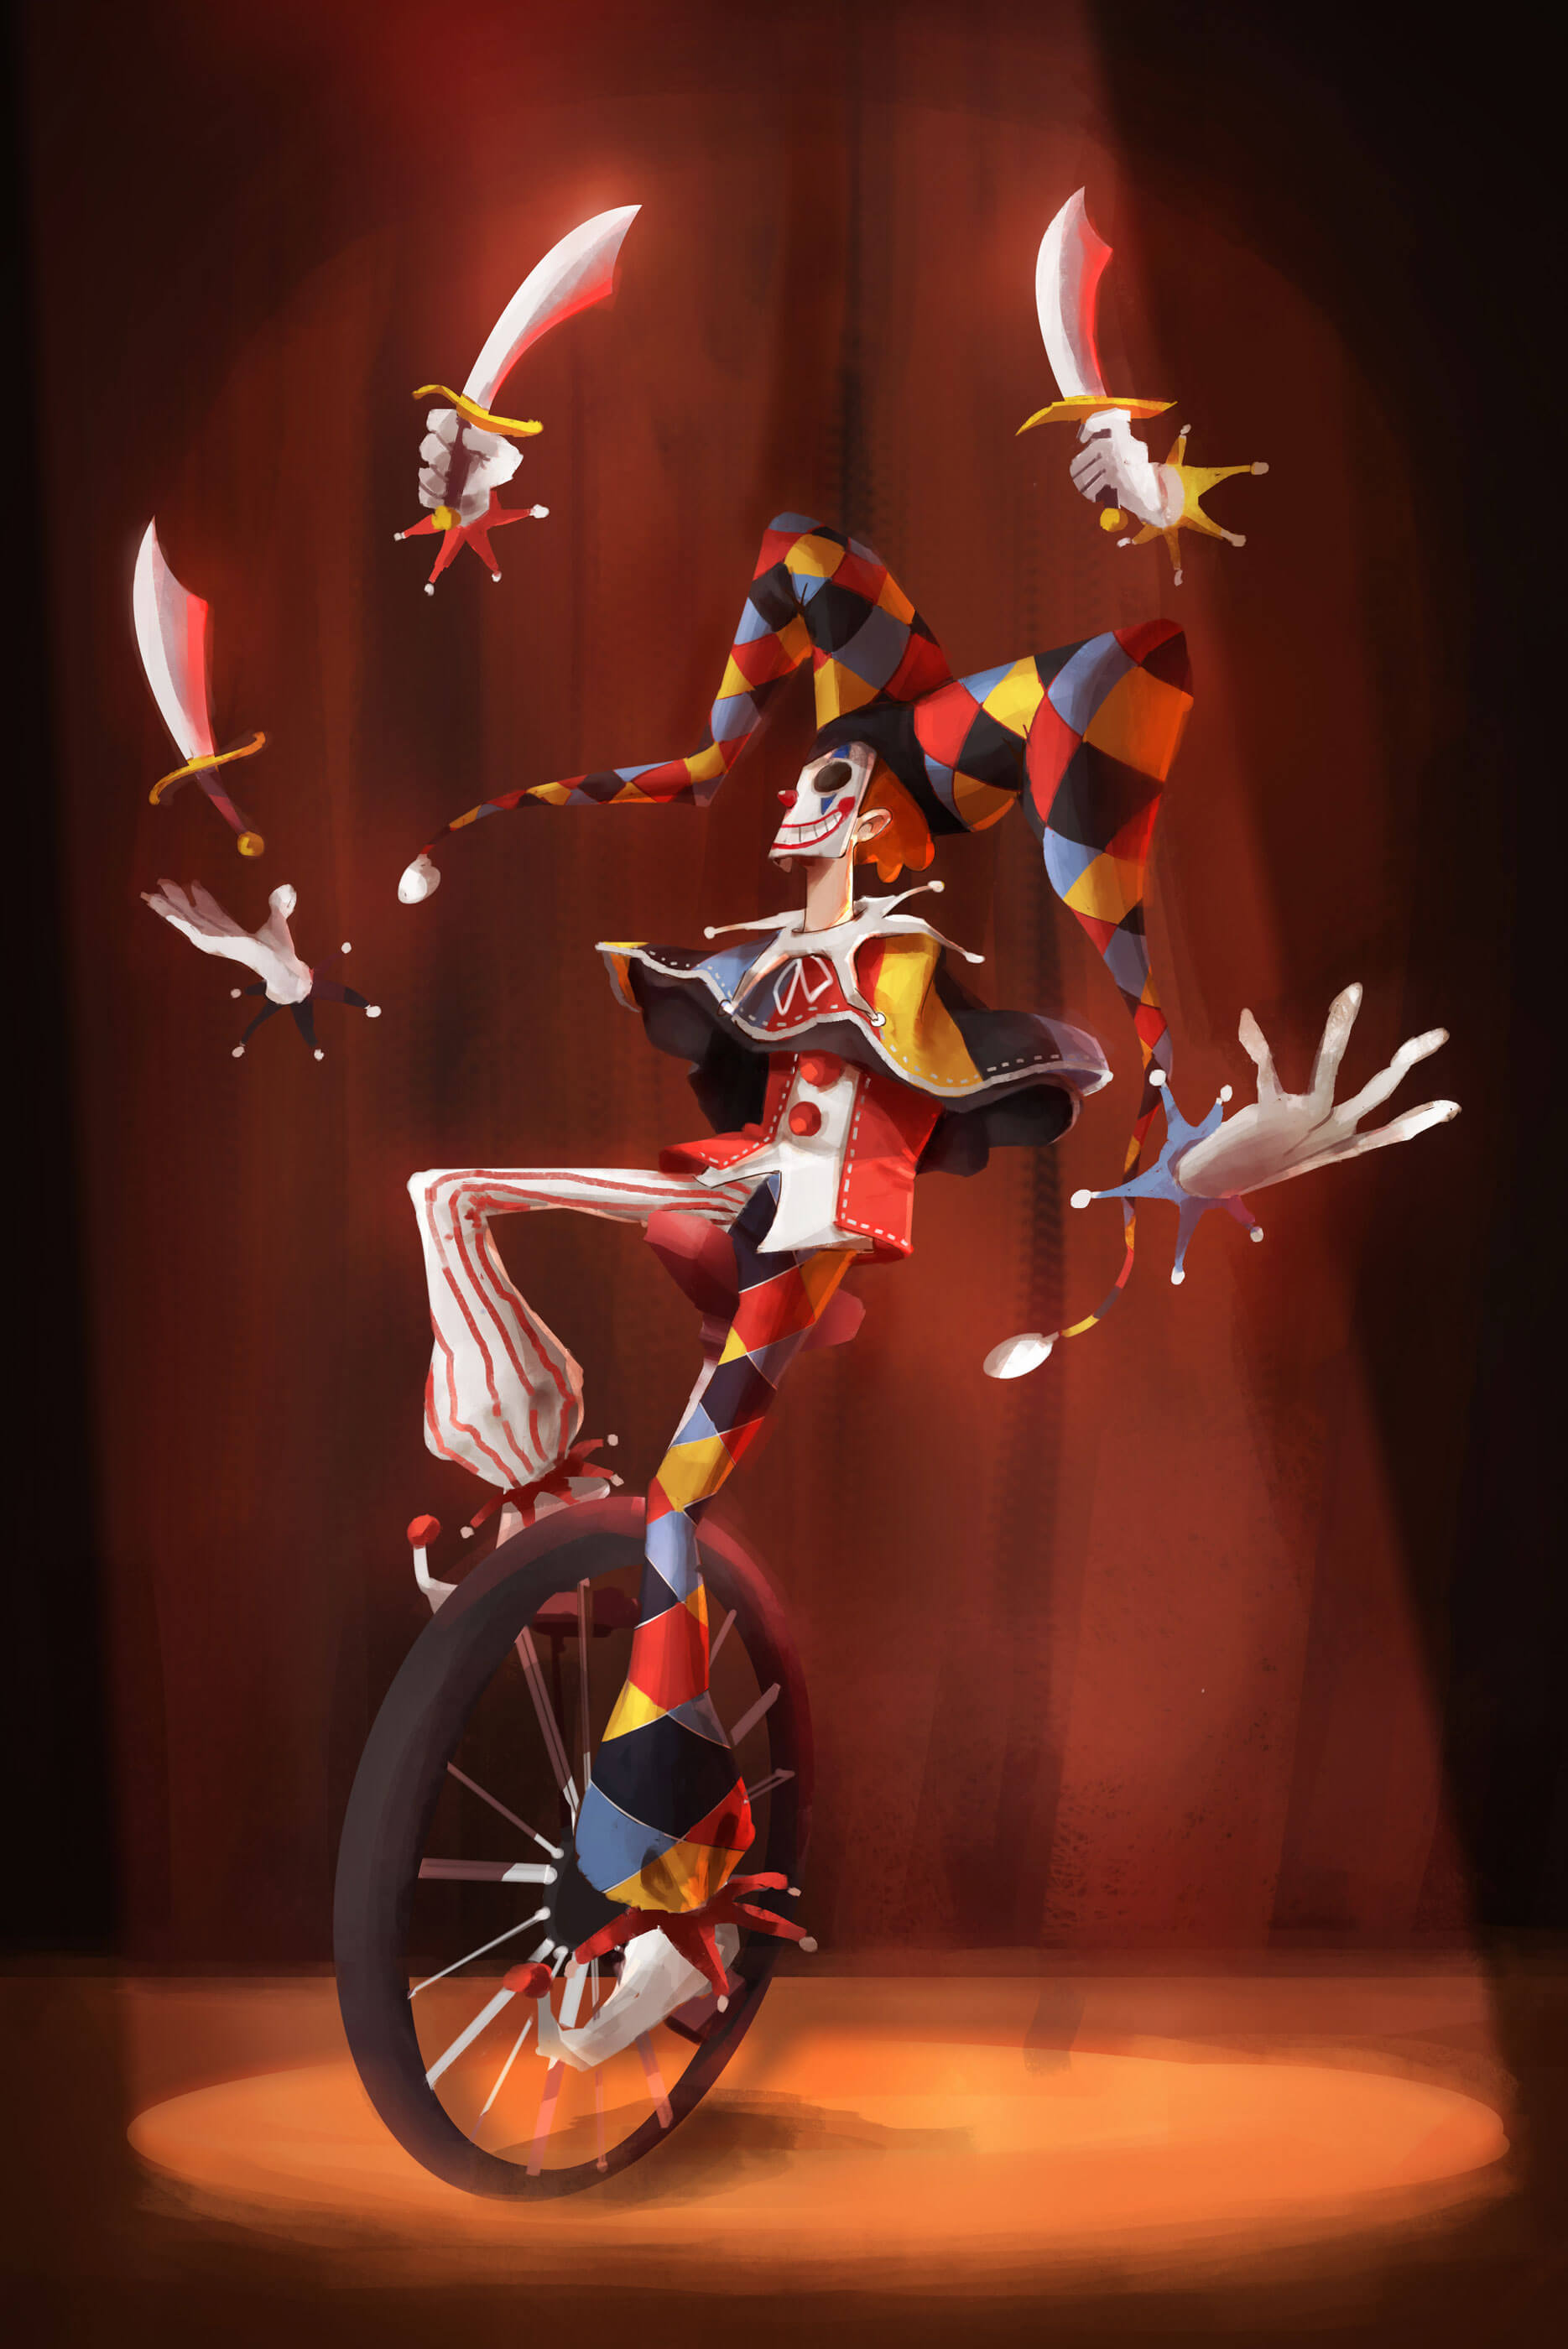 Drawing of a clown on a unicycle juggling knives.